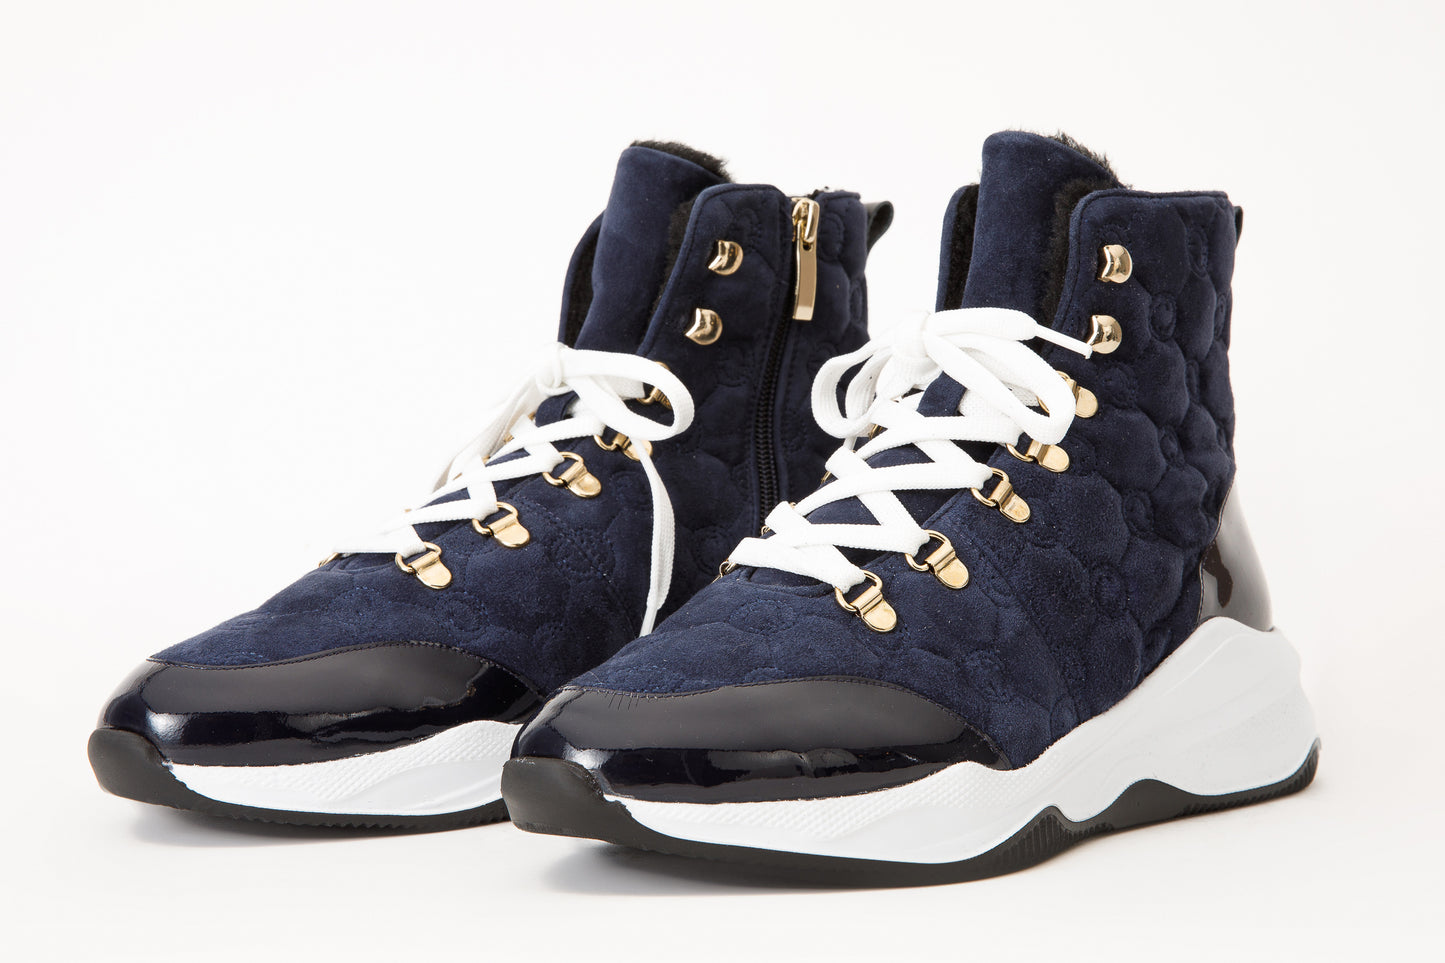 The Cambridge Navy Blue Suede Quilted Leather Ankle Women Boot